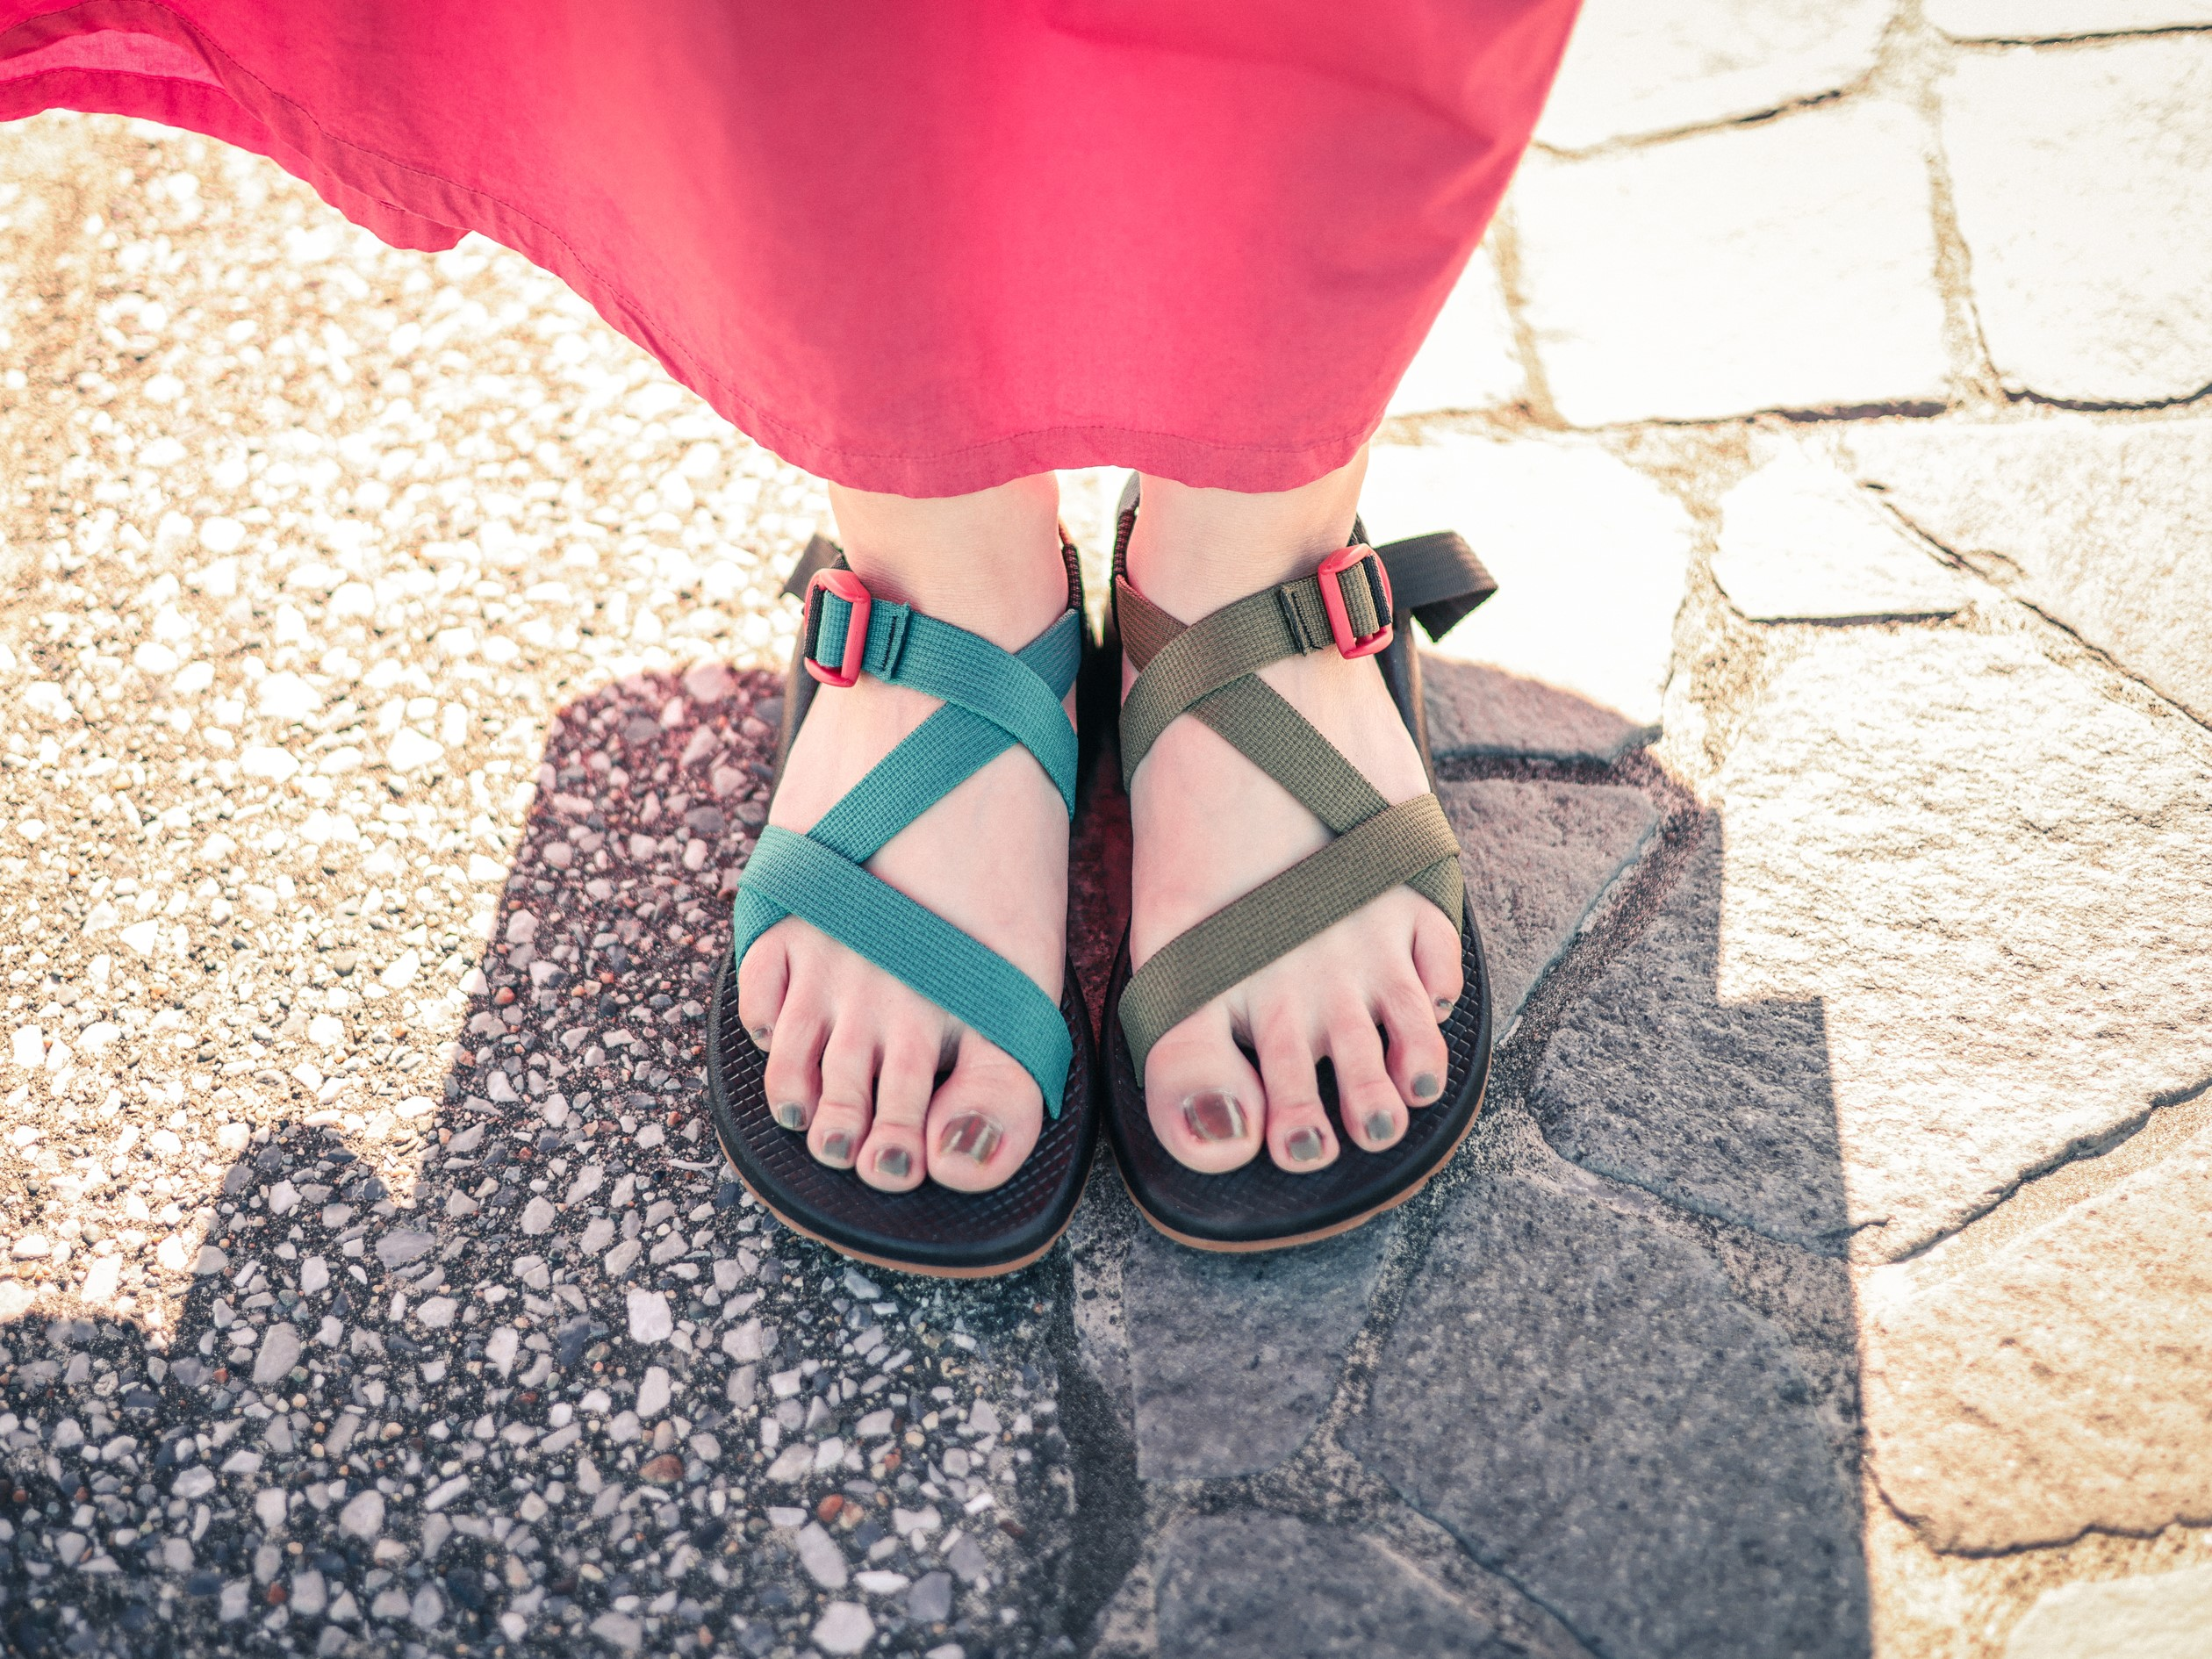 Chaco Z1 CLASSIC available at the A&F COUNTRY